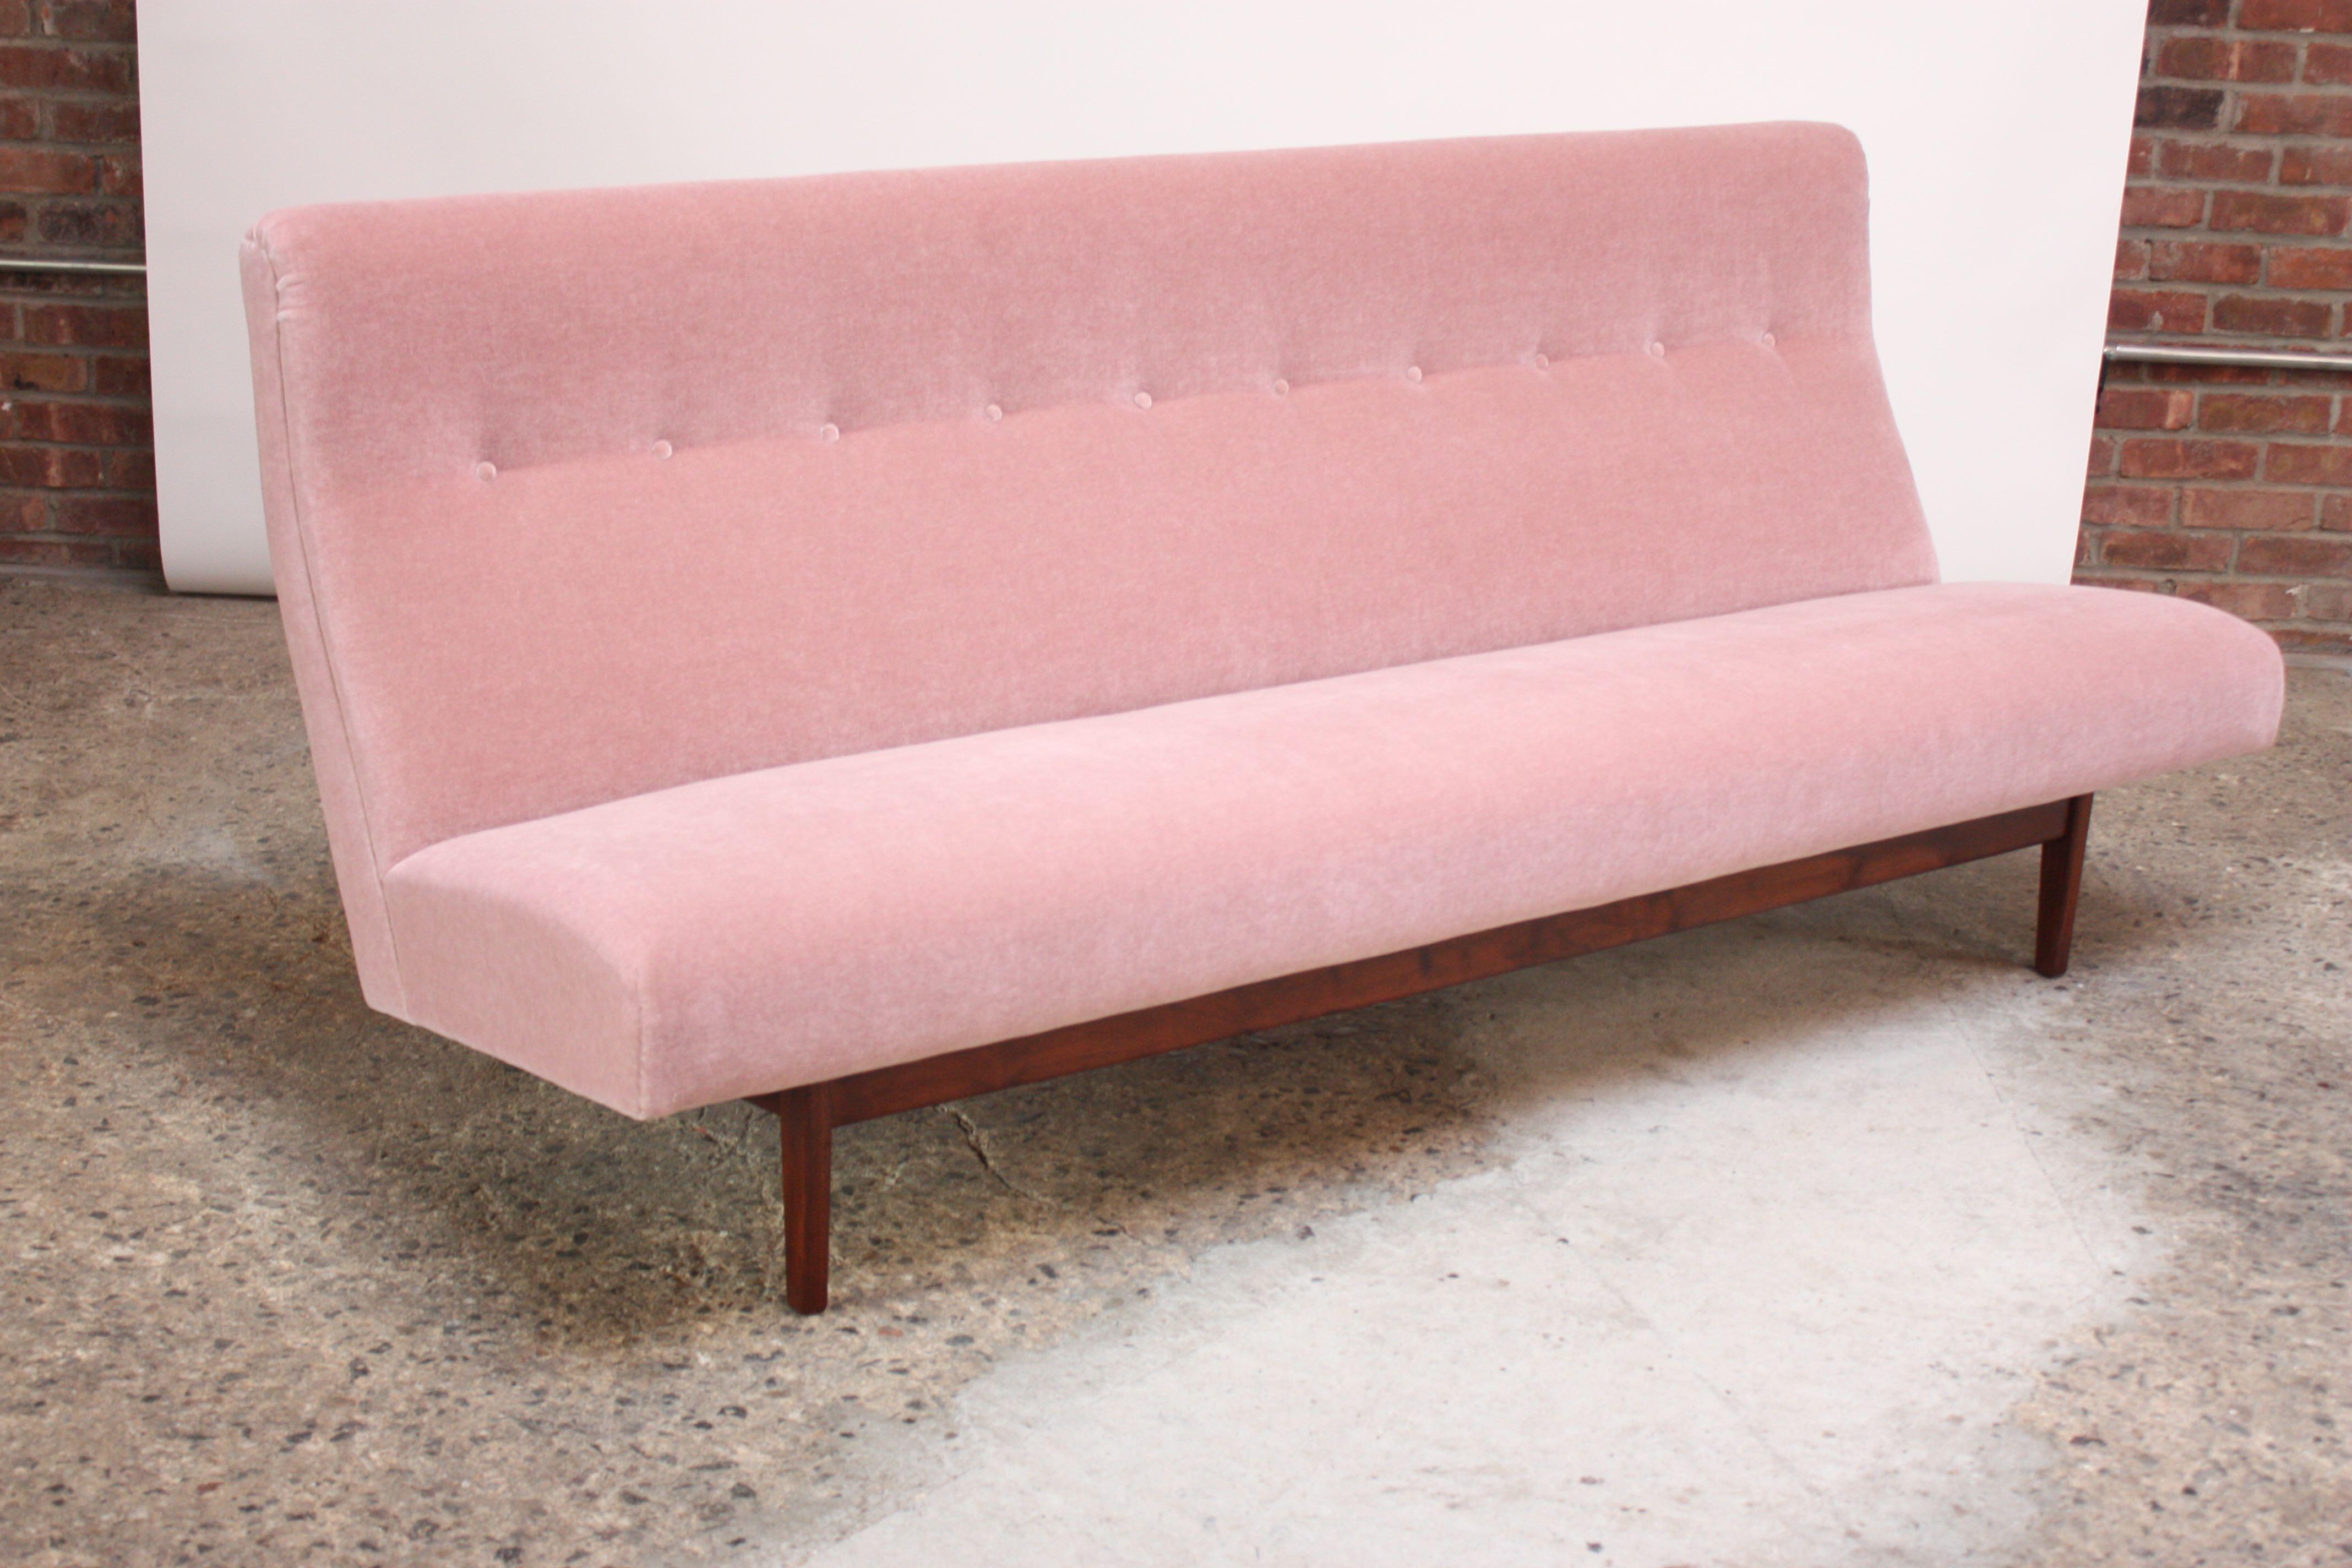 Three-seat sofa, Model #U250, designed by Jens Risom for Risom Design in the 1950s.
Composed of a sculptural walnut base on which the tufted, high-back seat is mounted. Pink mohair and foam are new; frame has been refinished.